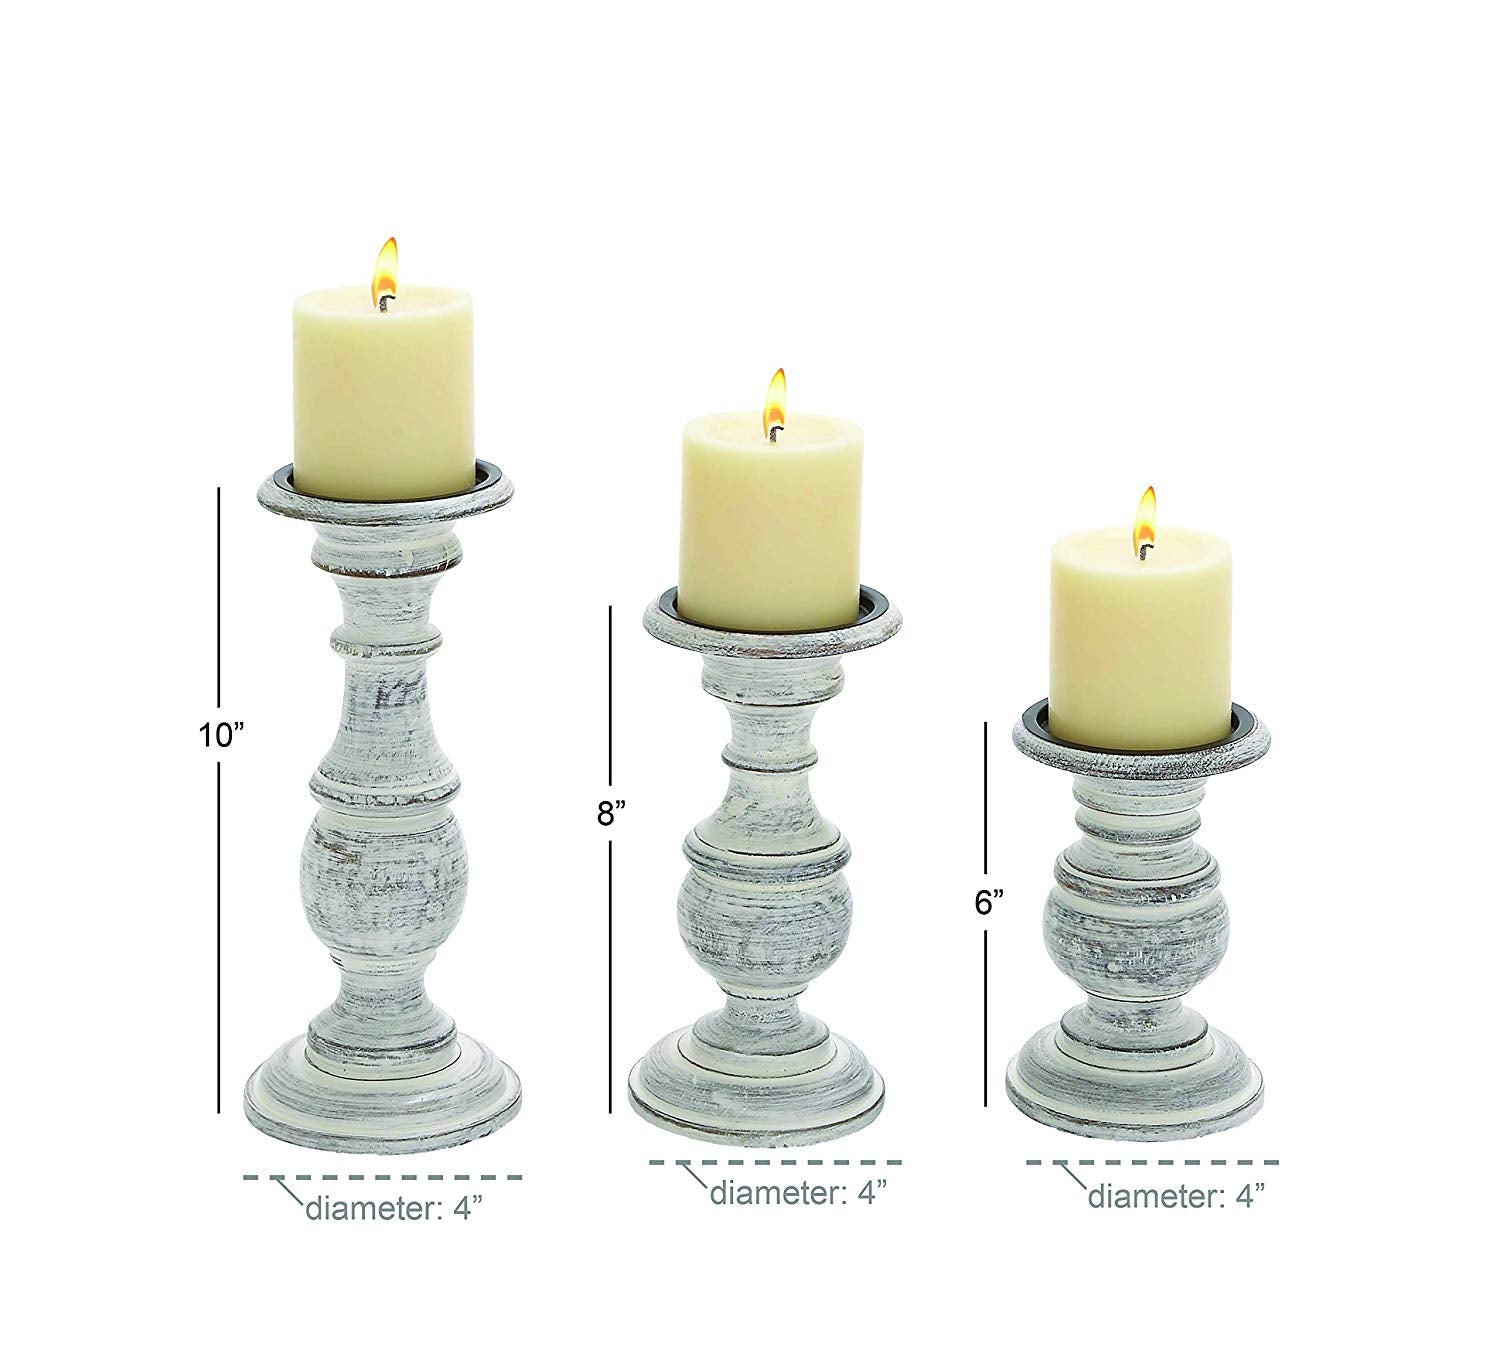 Deco 79 Distressed White Wood Candle Holders with Spiked Candle Plates, Traditional Style Table Decor, White Candlesticks Accent Decor | Set of 3: 4”, 6”, 8”